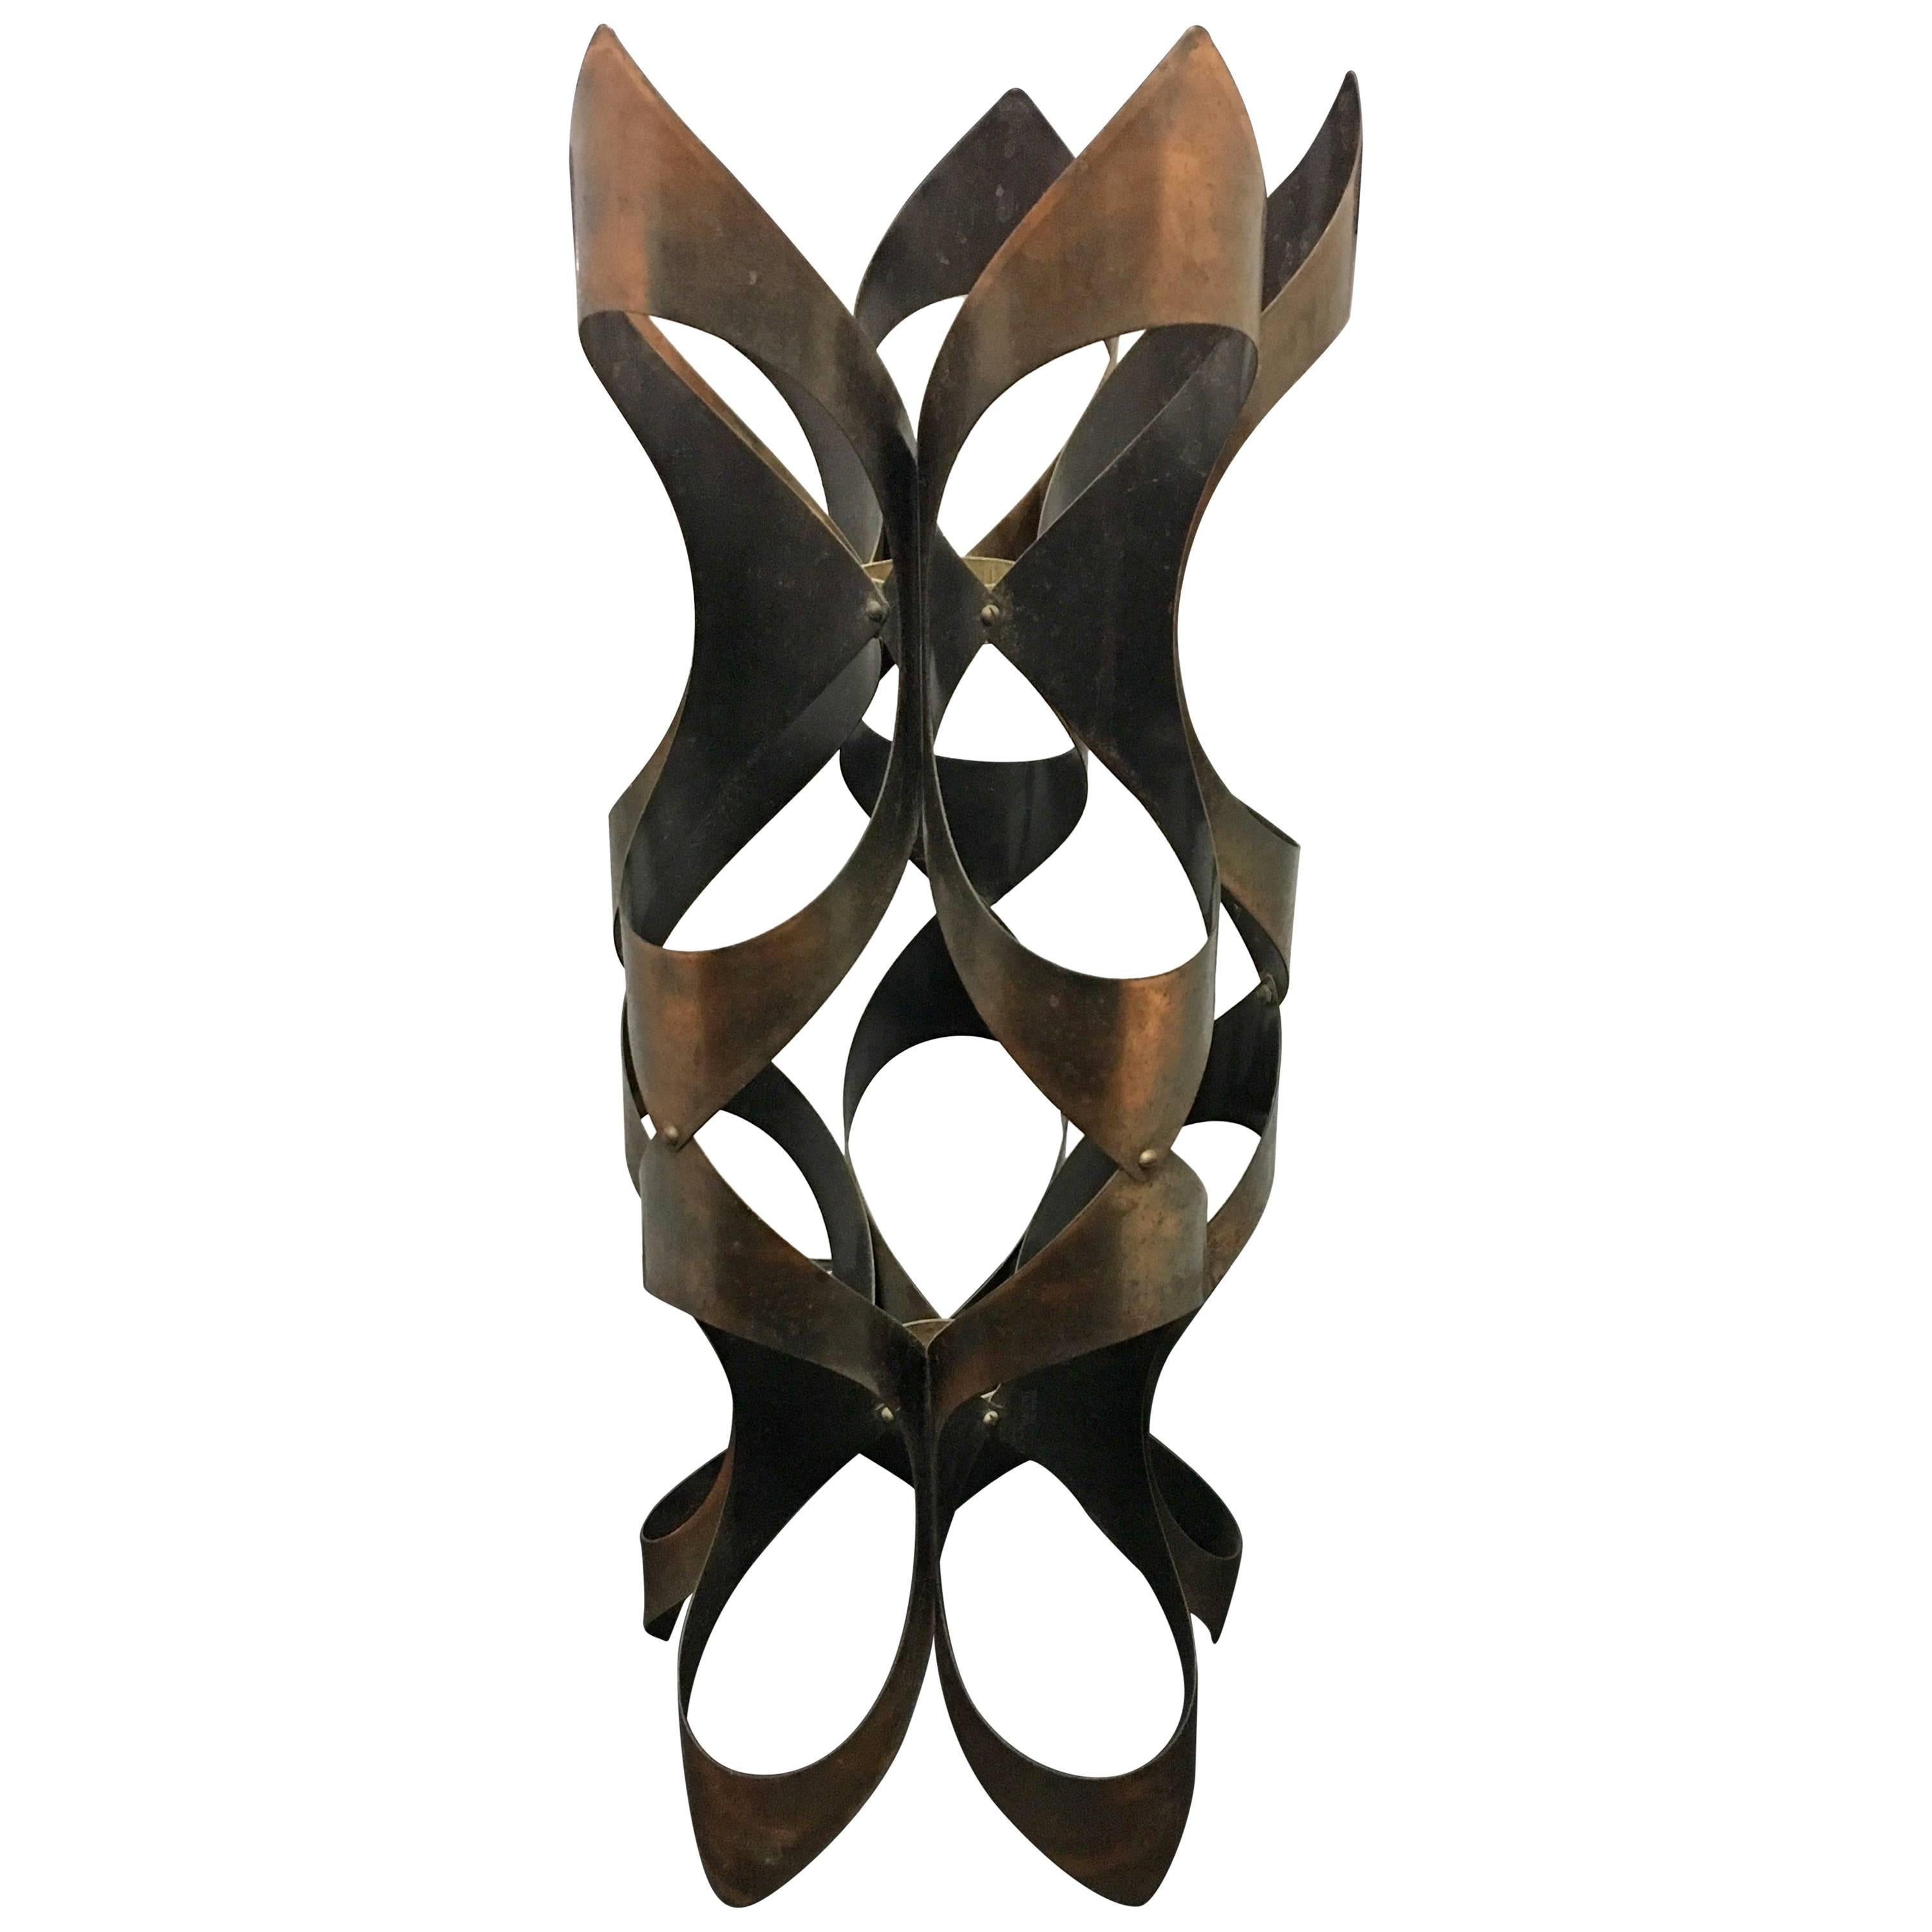 Mid-Century Modern Copper Patinated Freeform Abstract Sculpture by Mascot